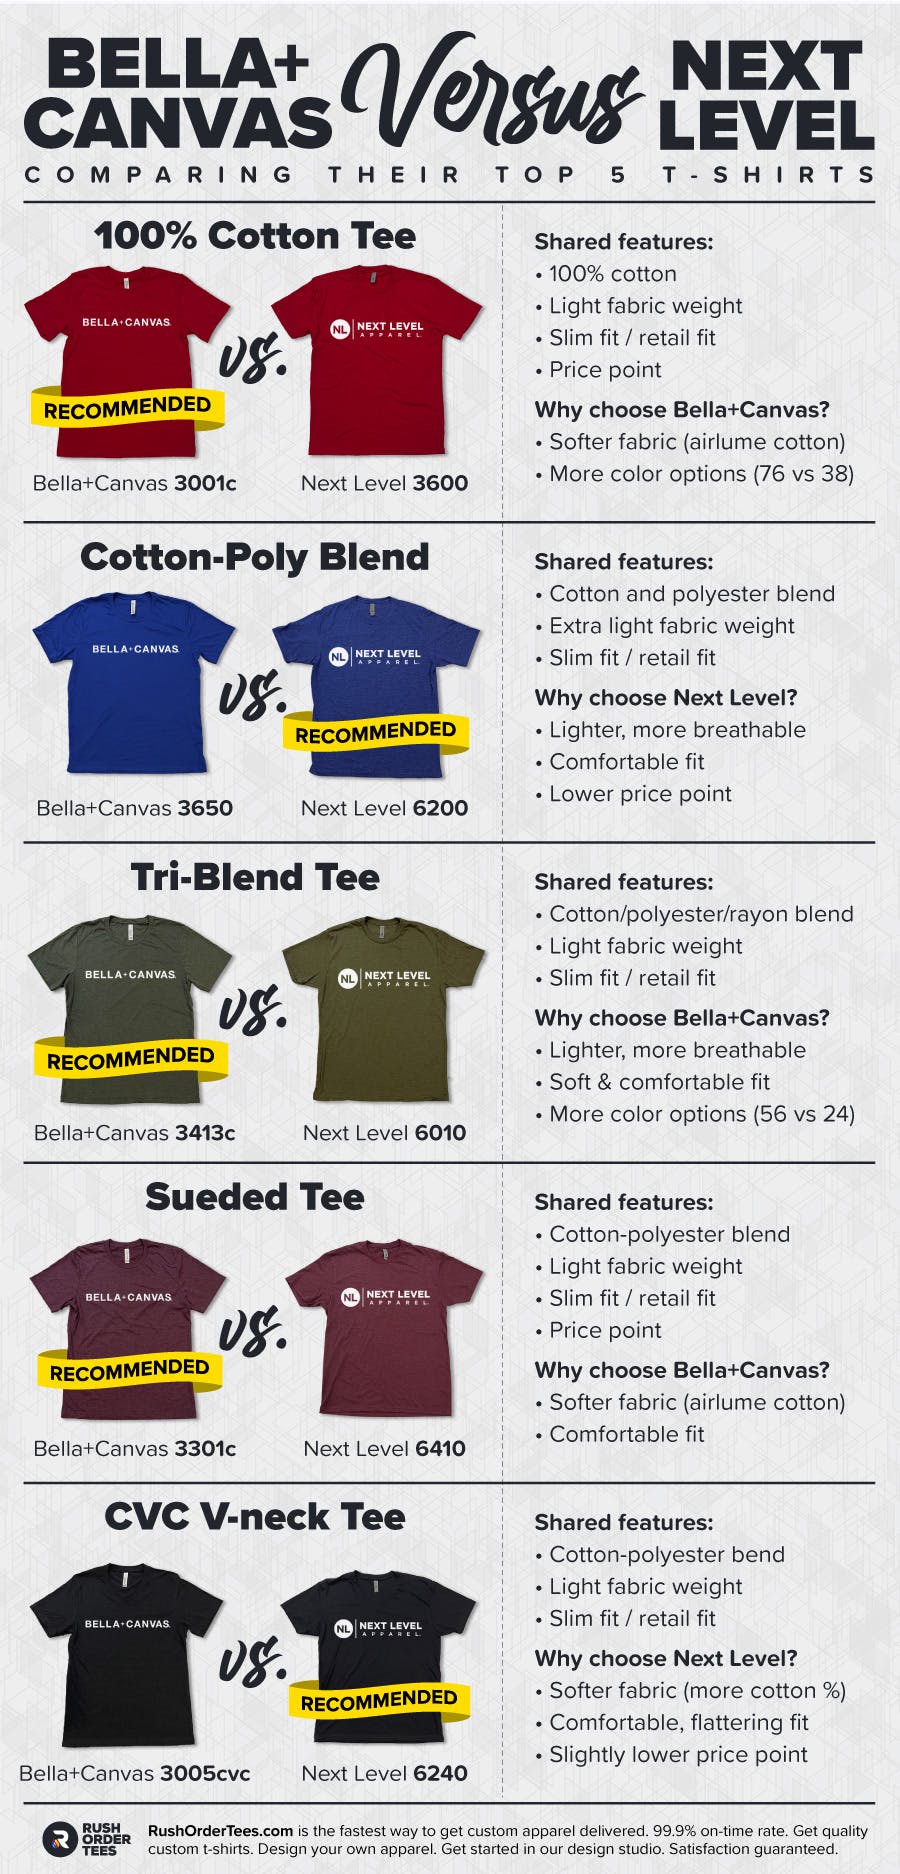 Bella+Canvas vs. Next Level: Comparing Their Top 5 Tees